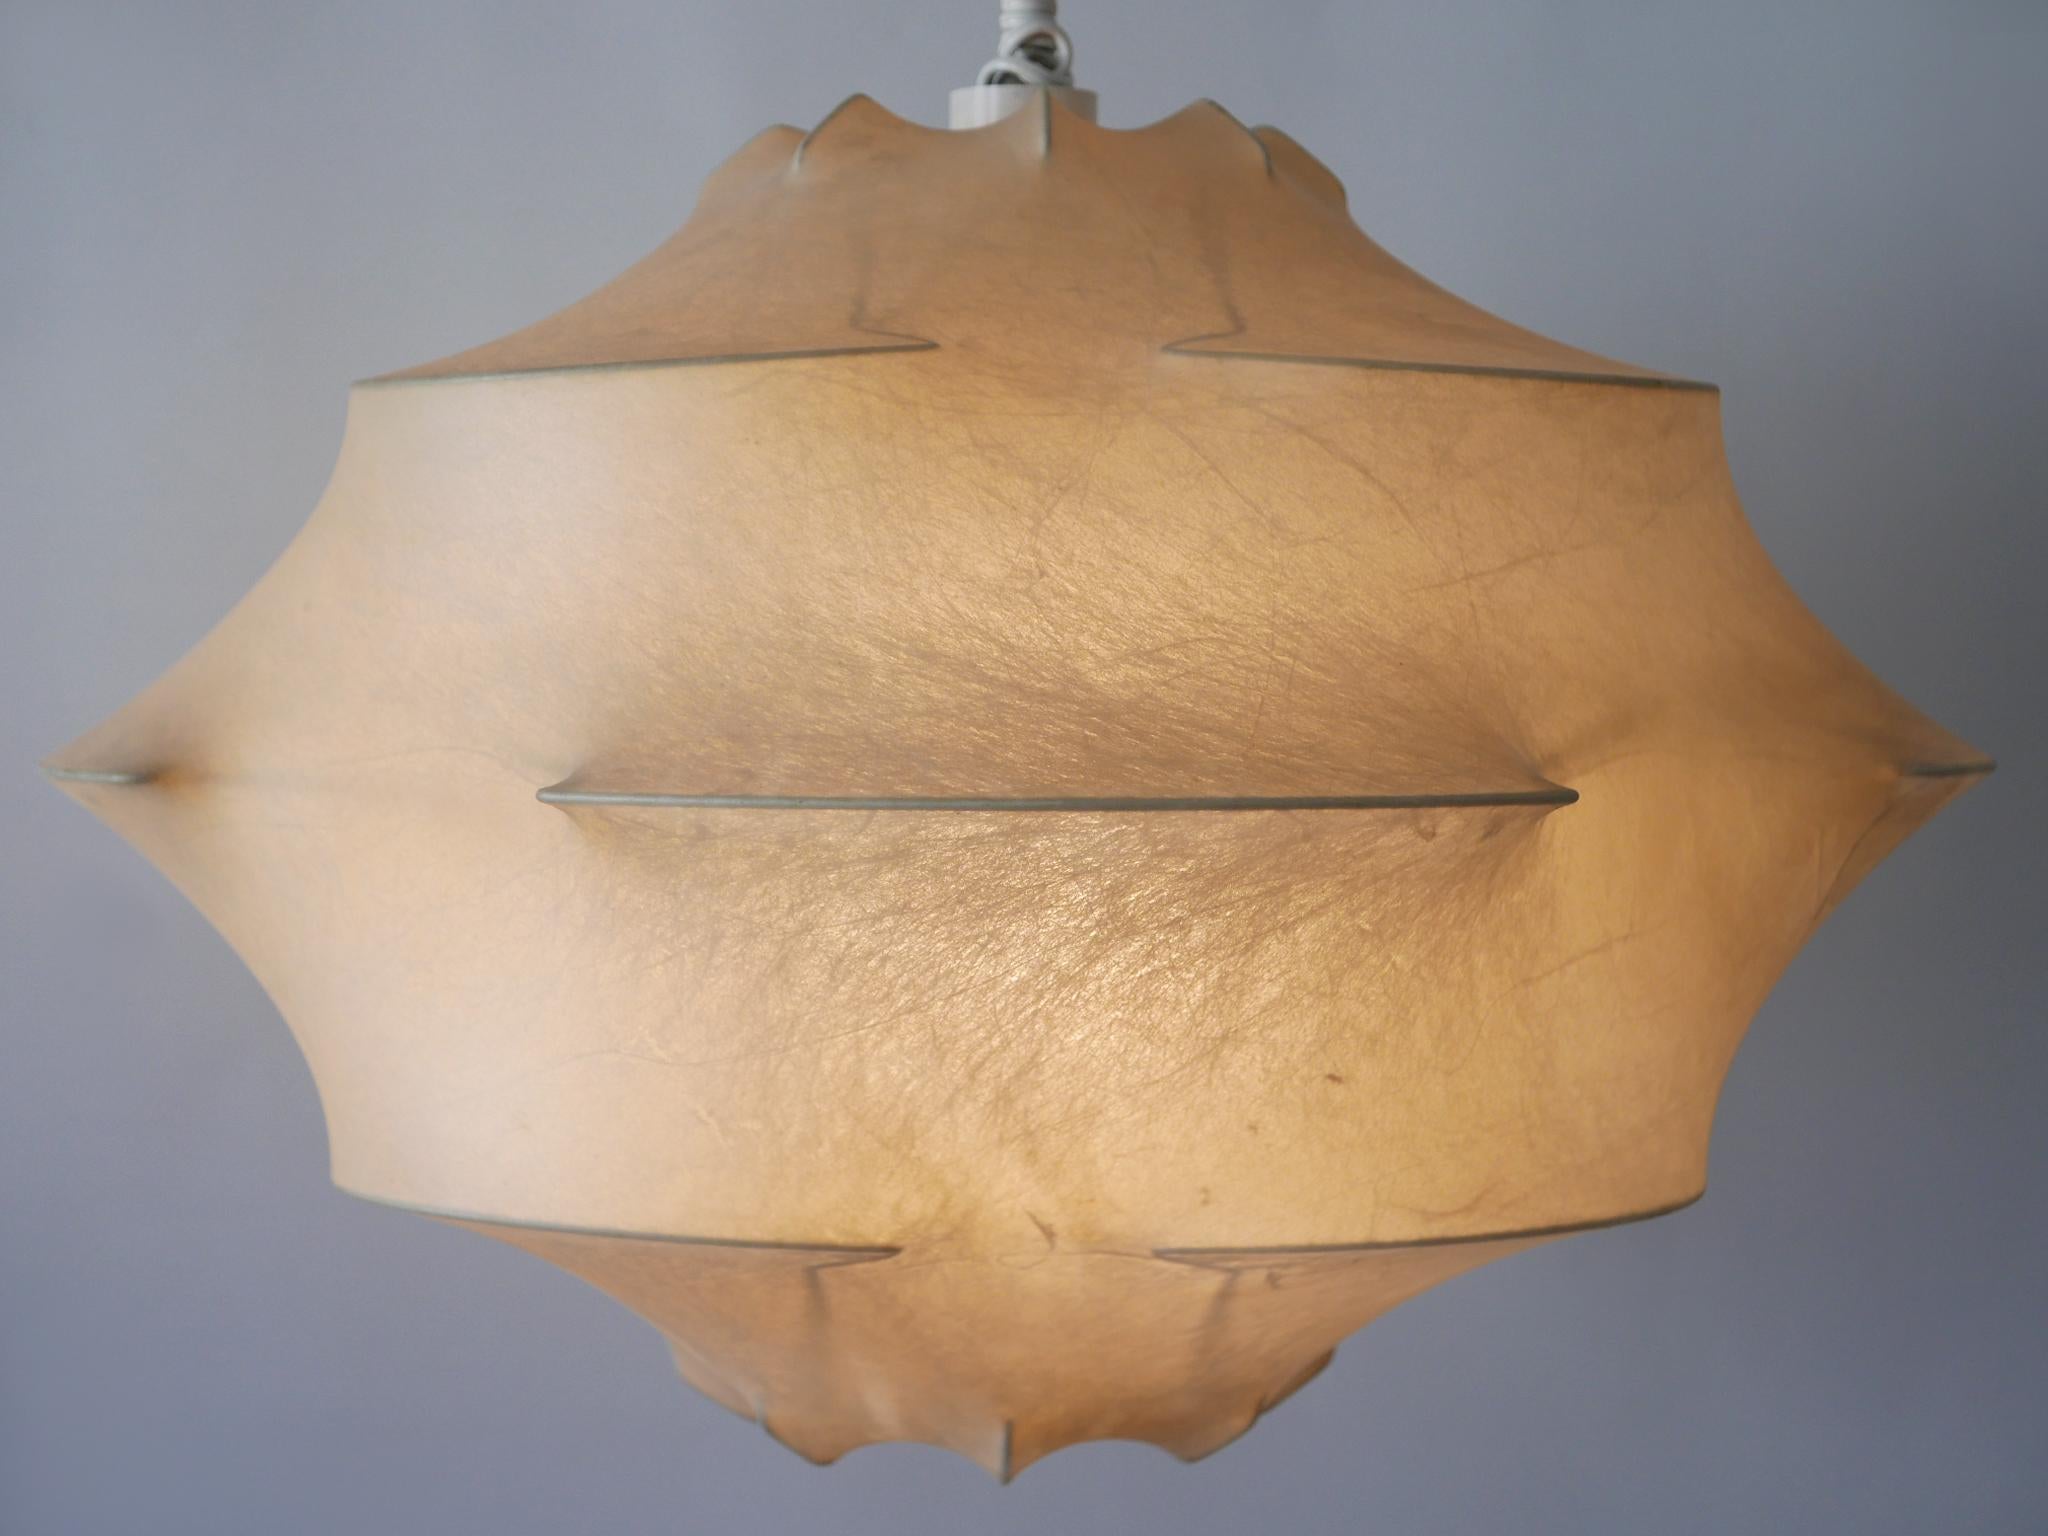 XL Mid-Century Modern Cocoon Pendant Lamp or Hanging Light by Flos Italy, 1960s For Sale 5